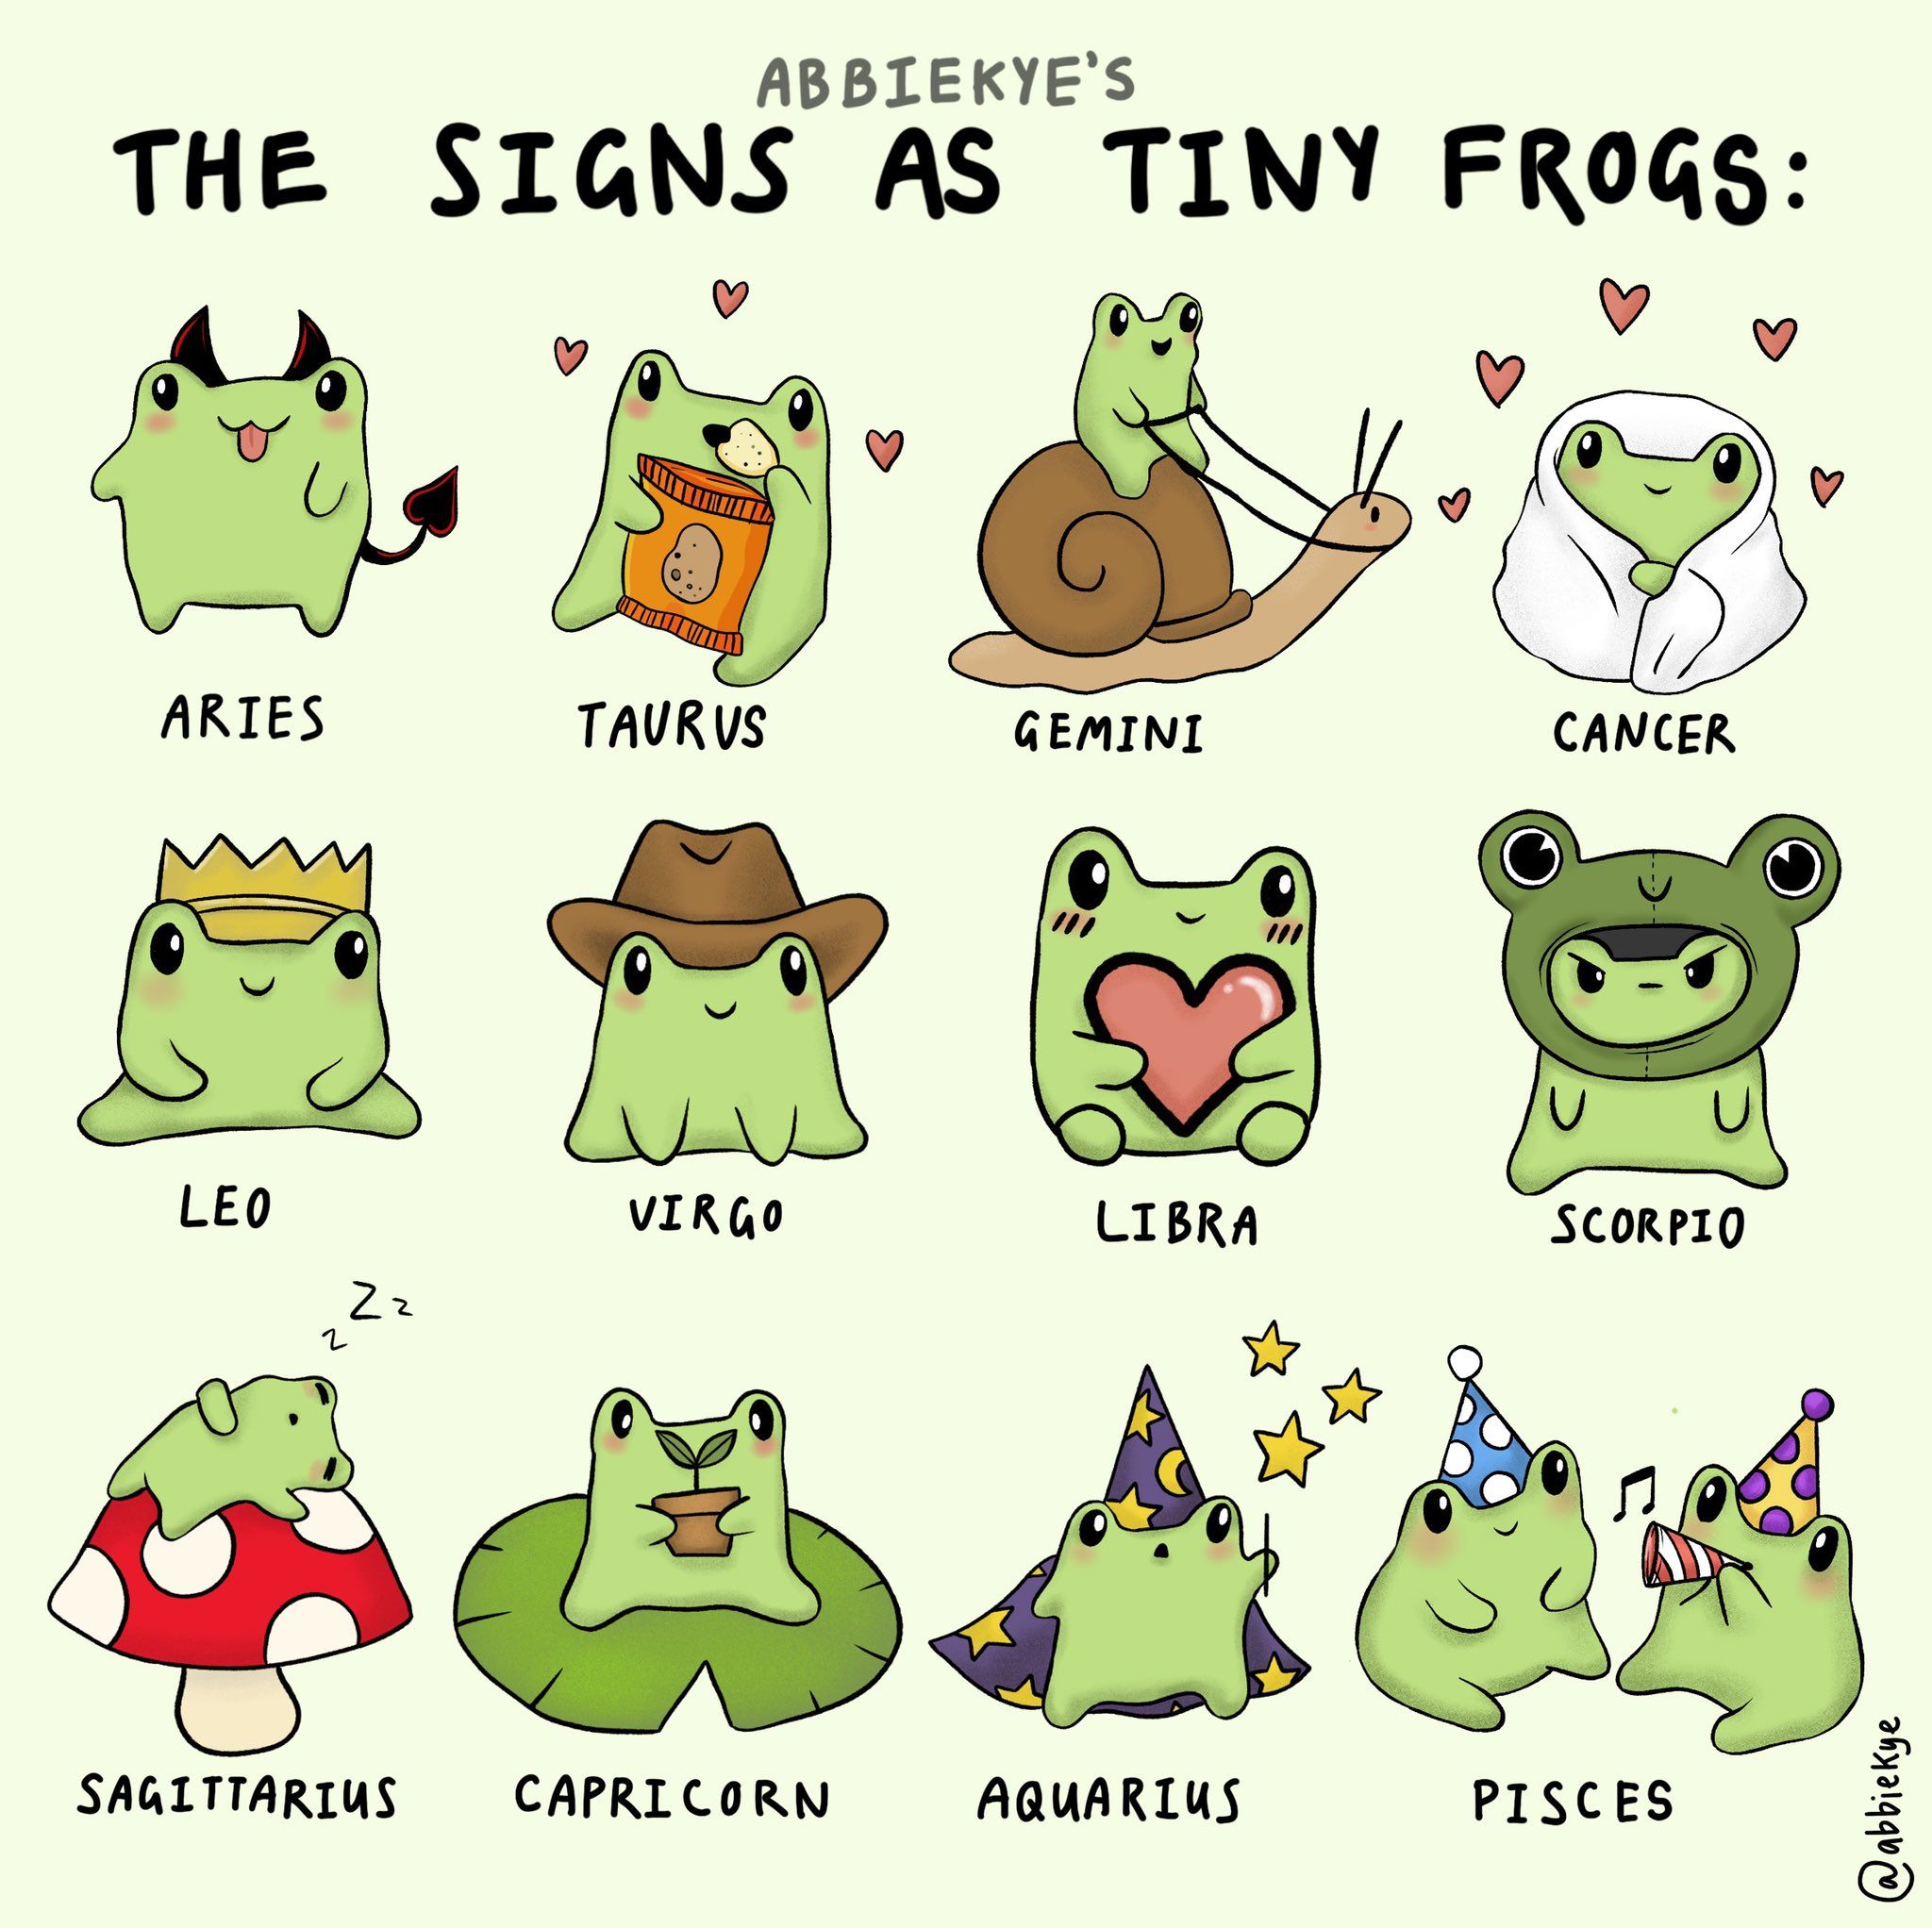 Abbie on Twitter. Frog drawing, Zodiac signs, Zodiac signs funny